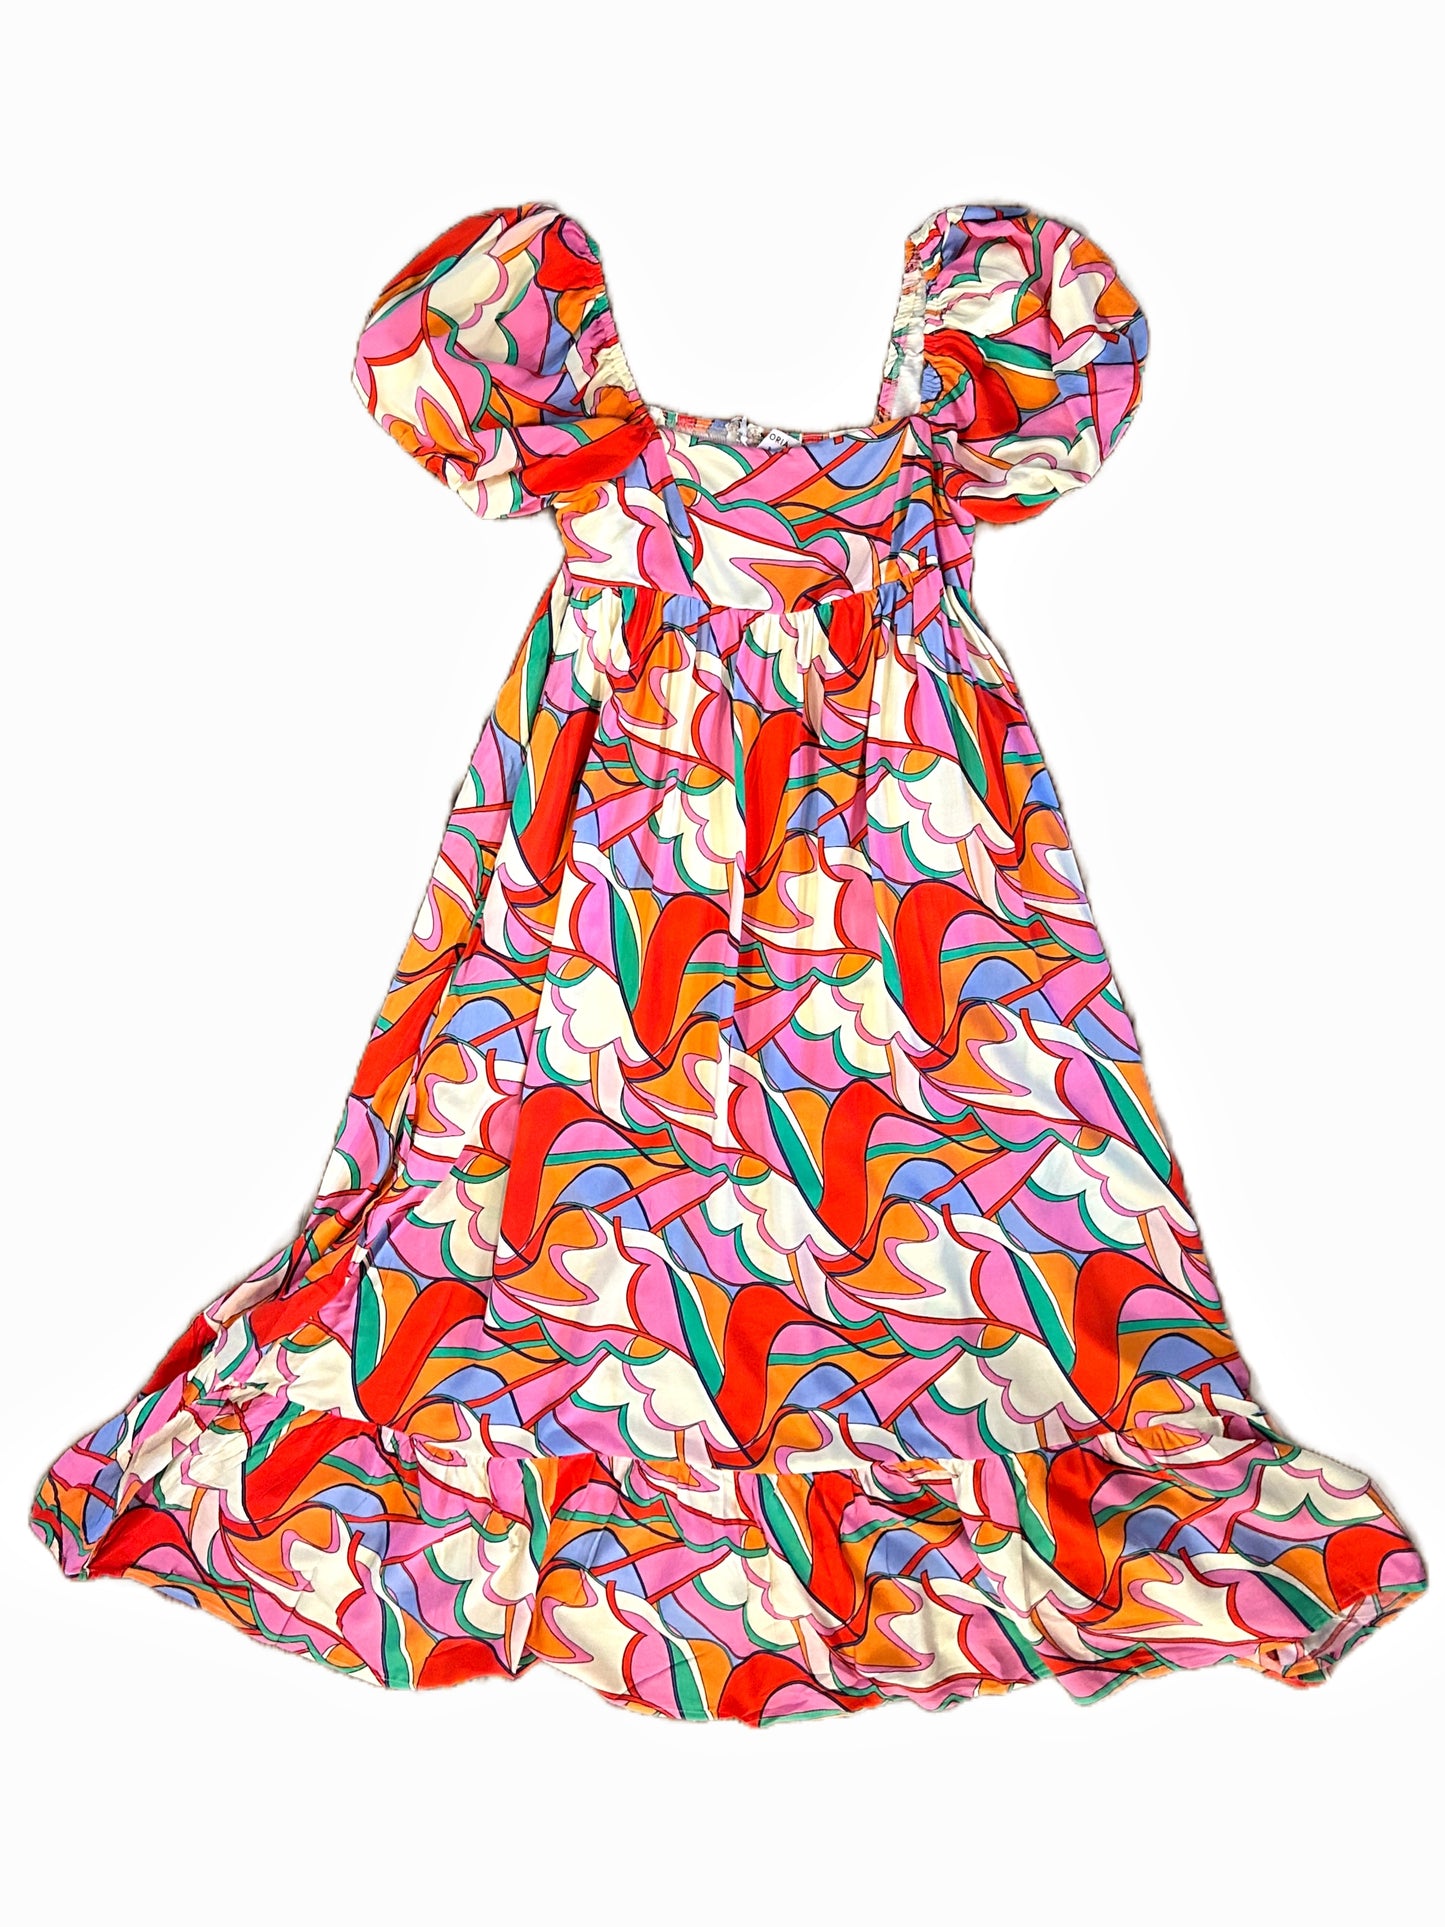 Colorful Abstract Dress